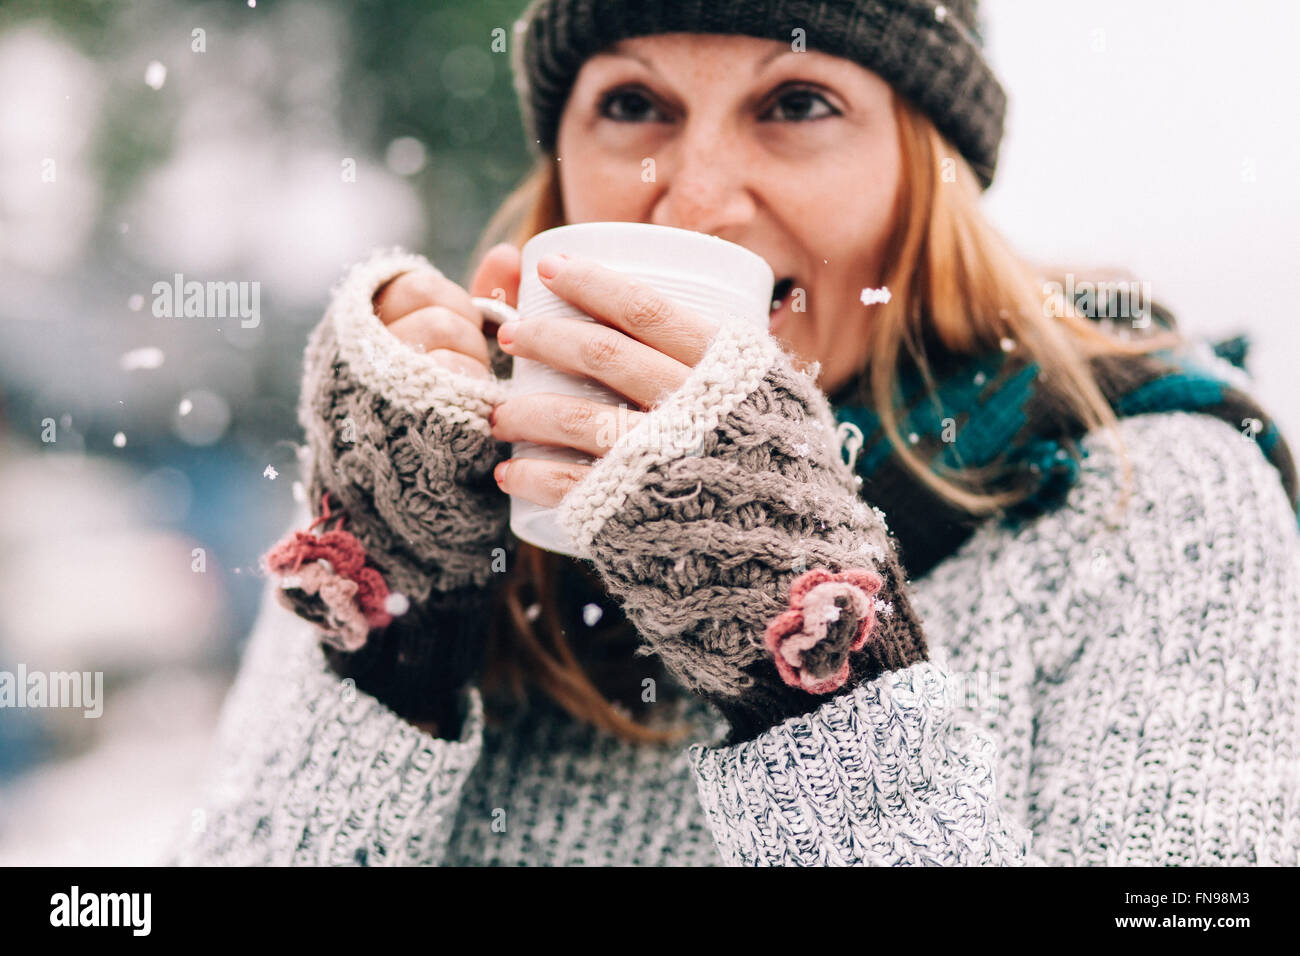 Woman standing in snow holding hot drink Stock Photo